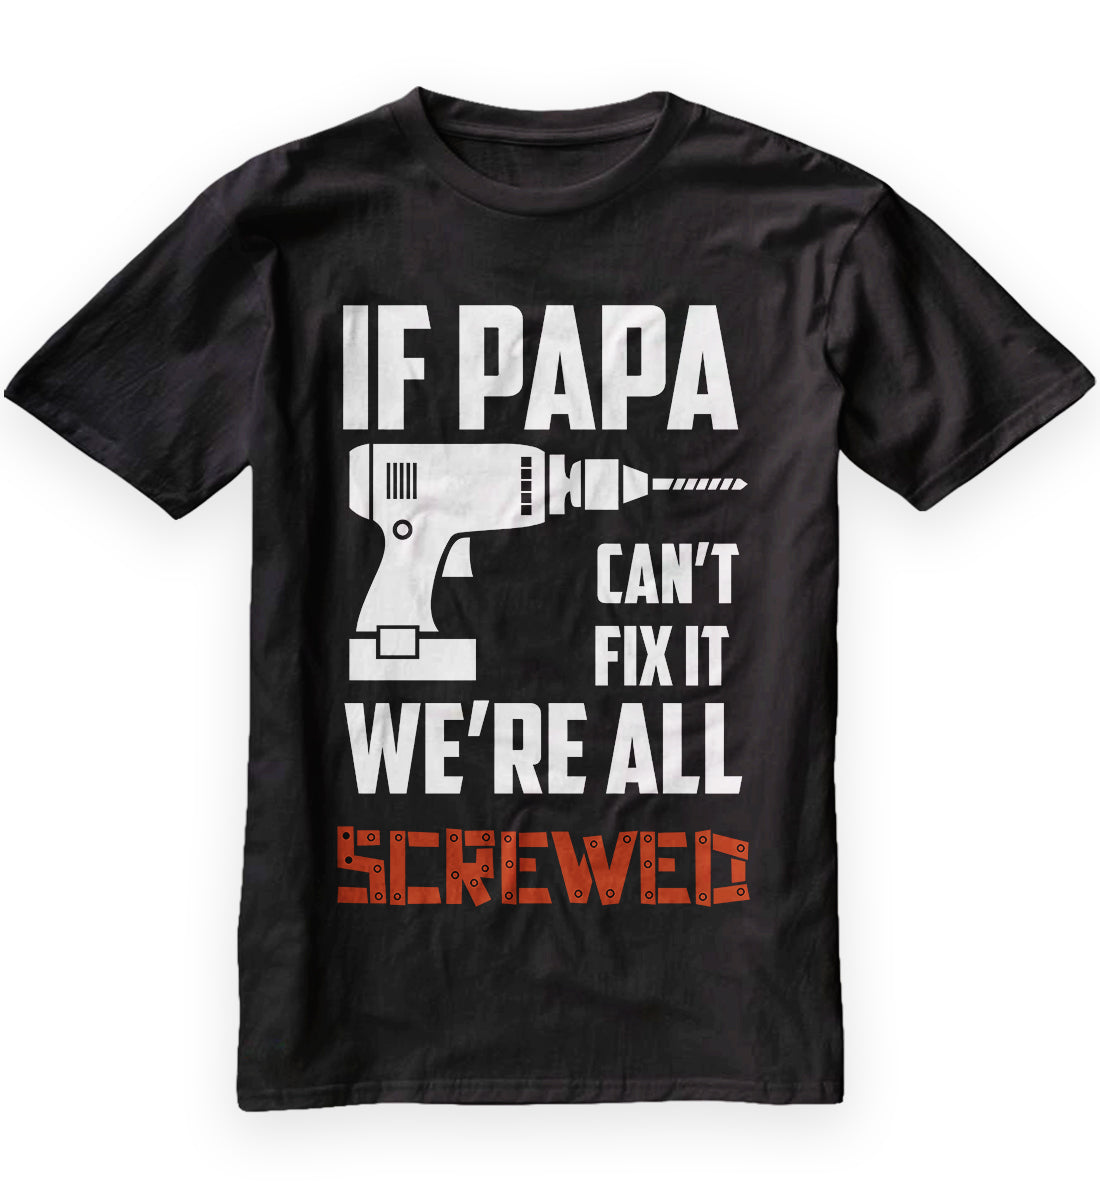 If Papa Can't Fix It We're All Screwed Shirt